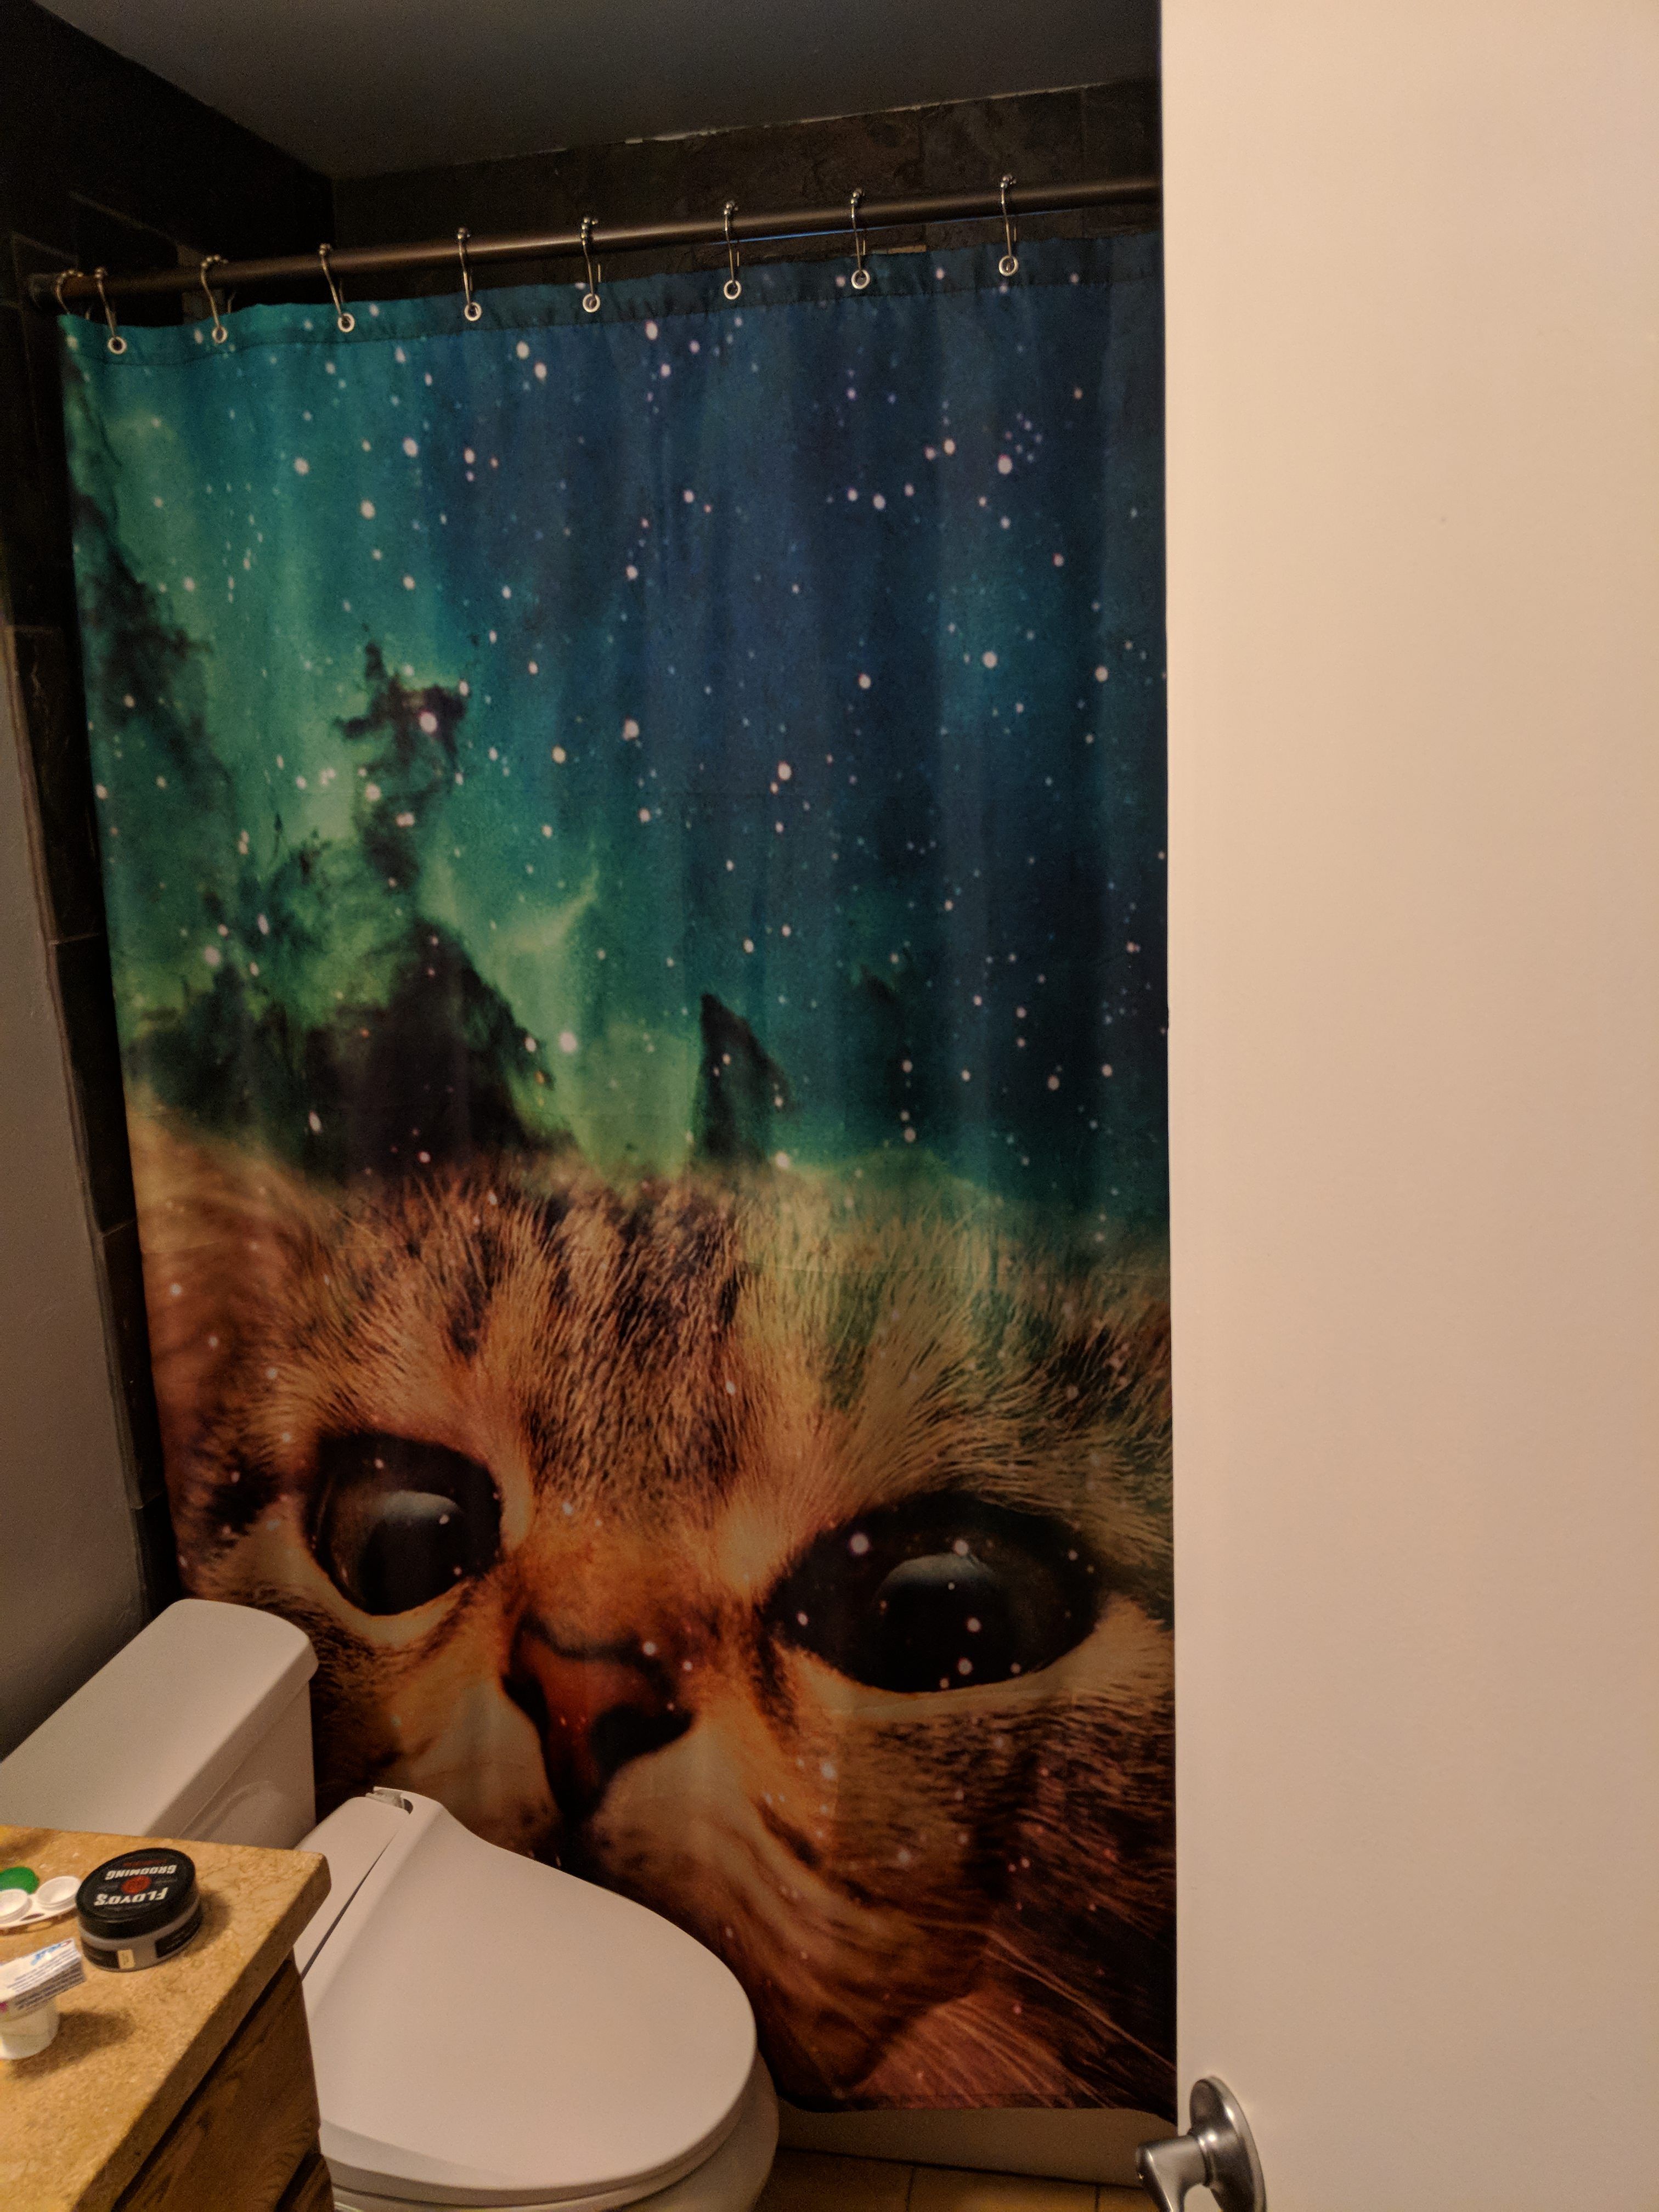 My wife barred me from drunken eBay purchases after I bought a shower curtain.